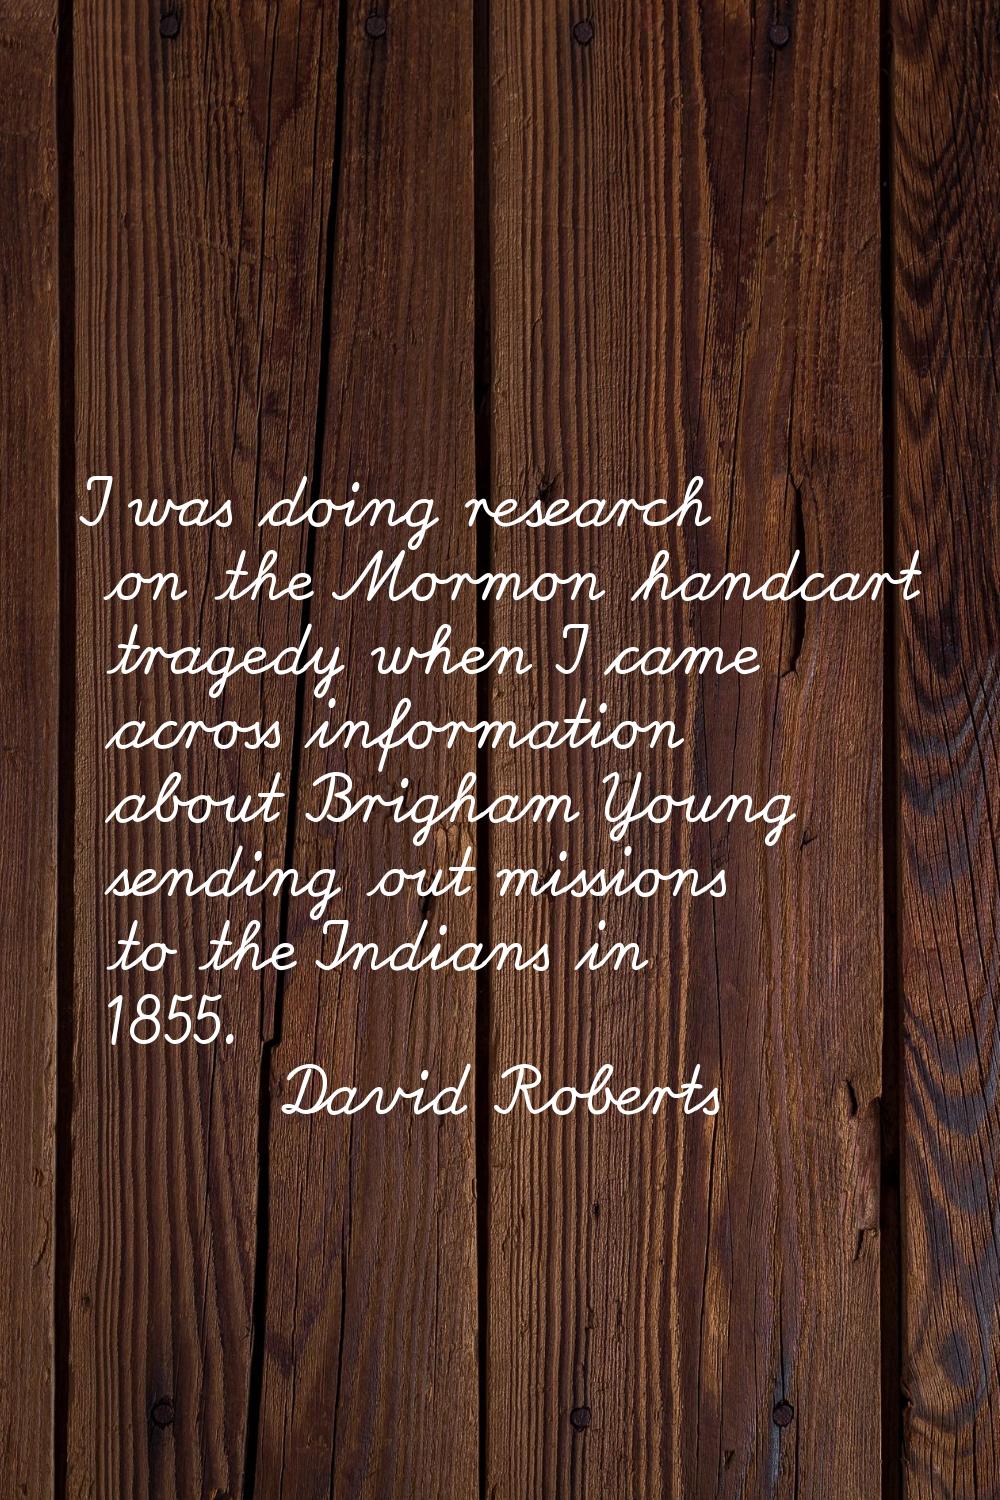 I was doing research on the Mormon handcart tragedy when I came across information about Brigham Yo